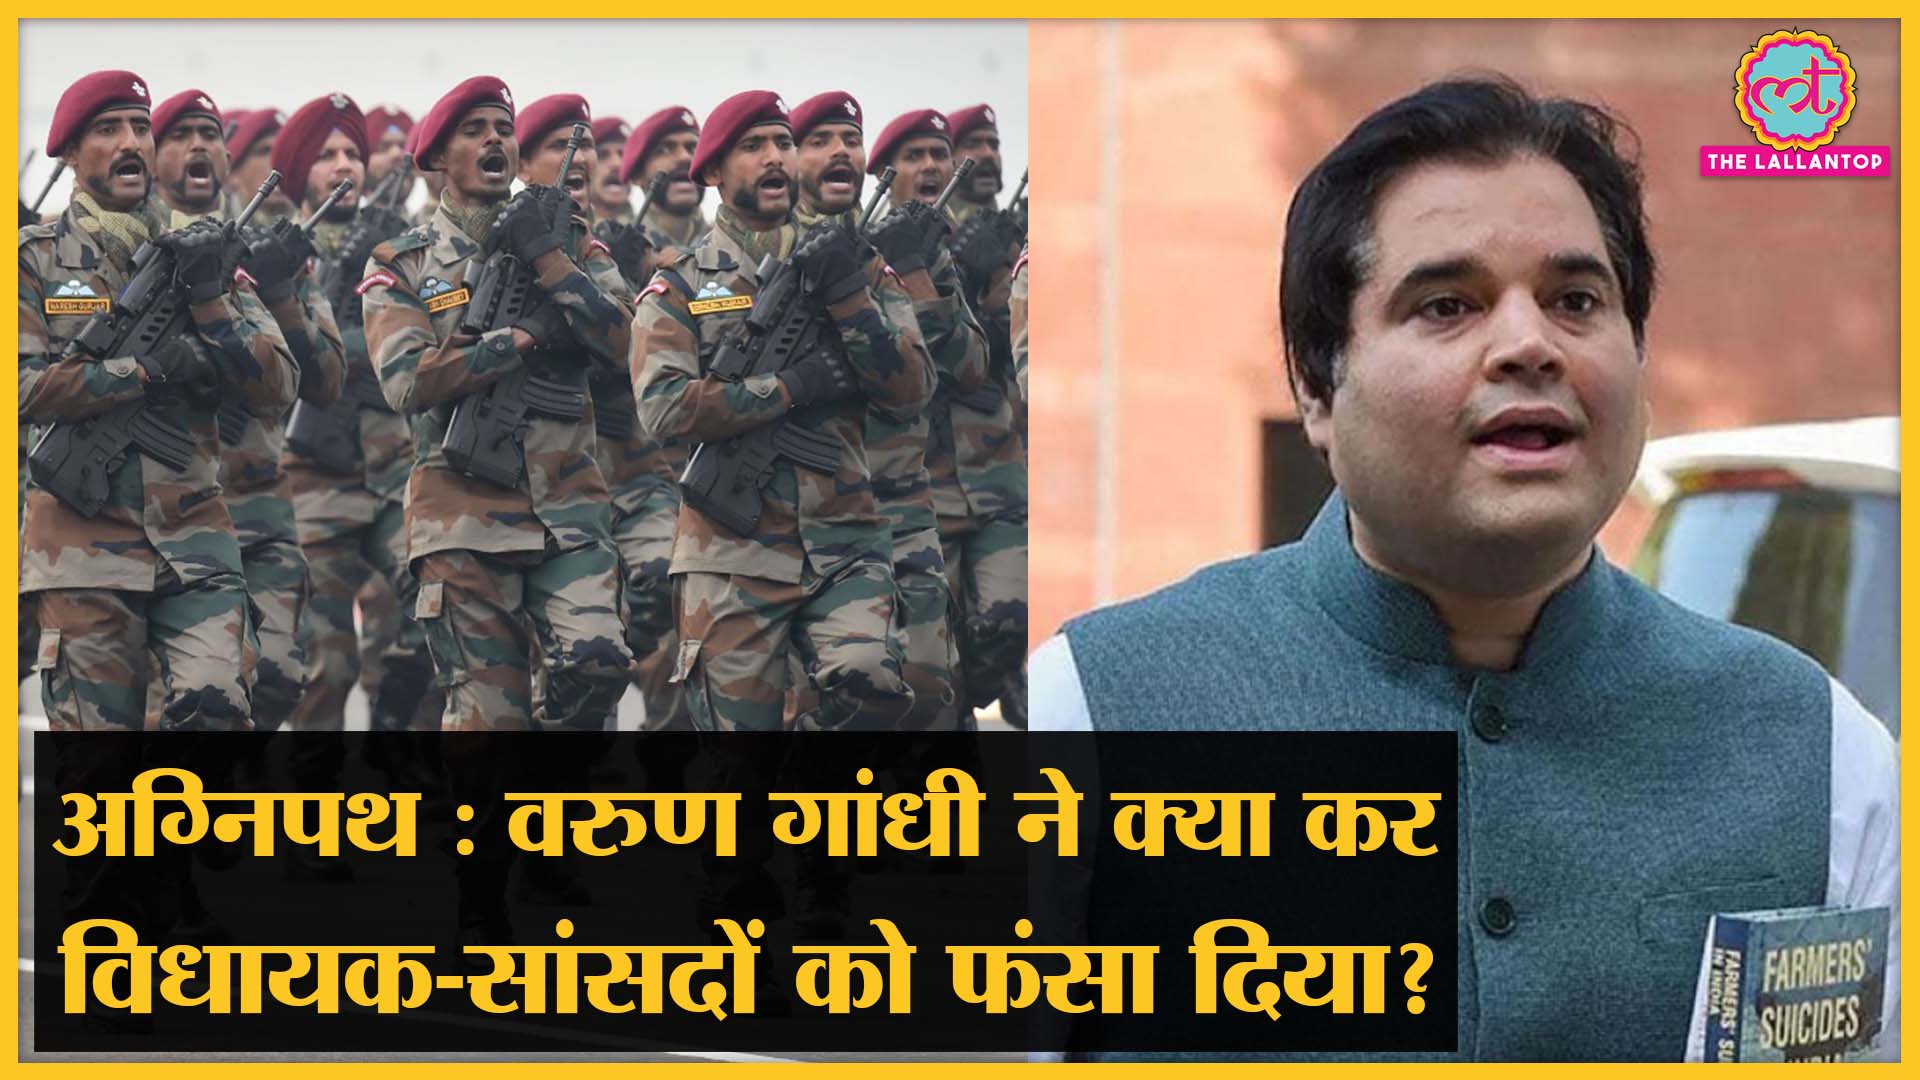 varun gandhi says agniveer is not entitled to pension then i am also ready to give up my pension